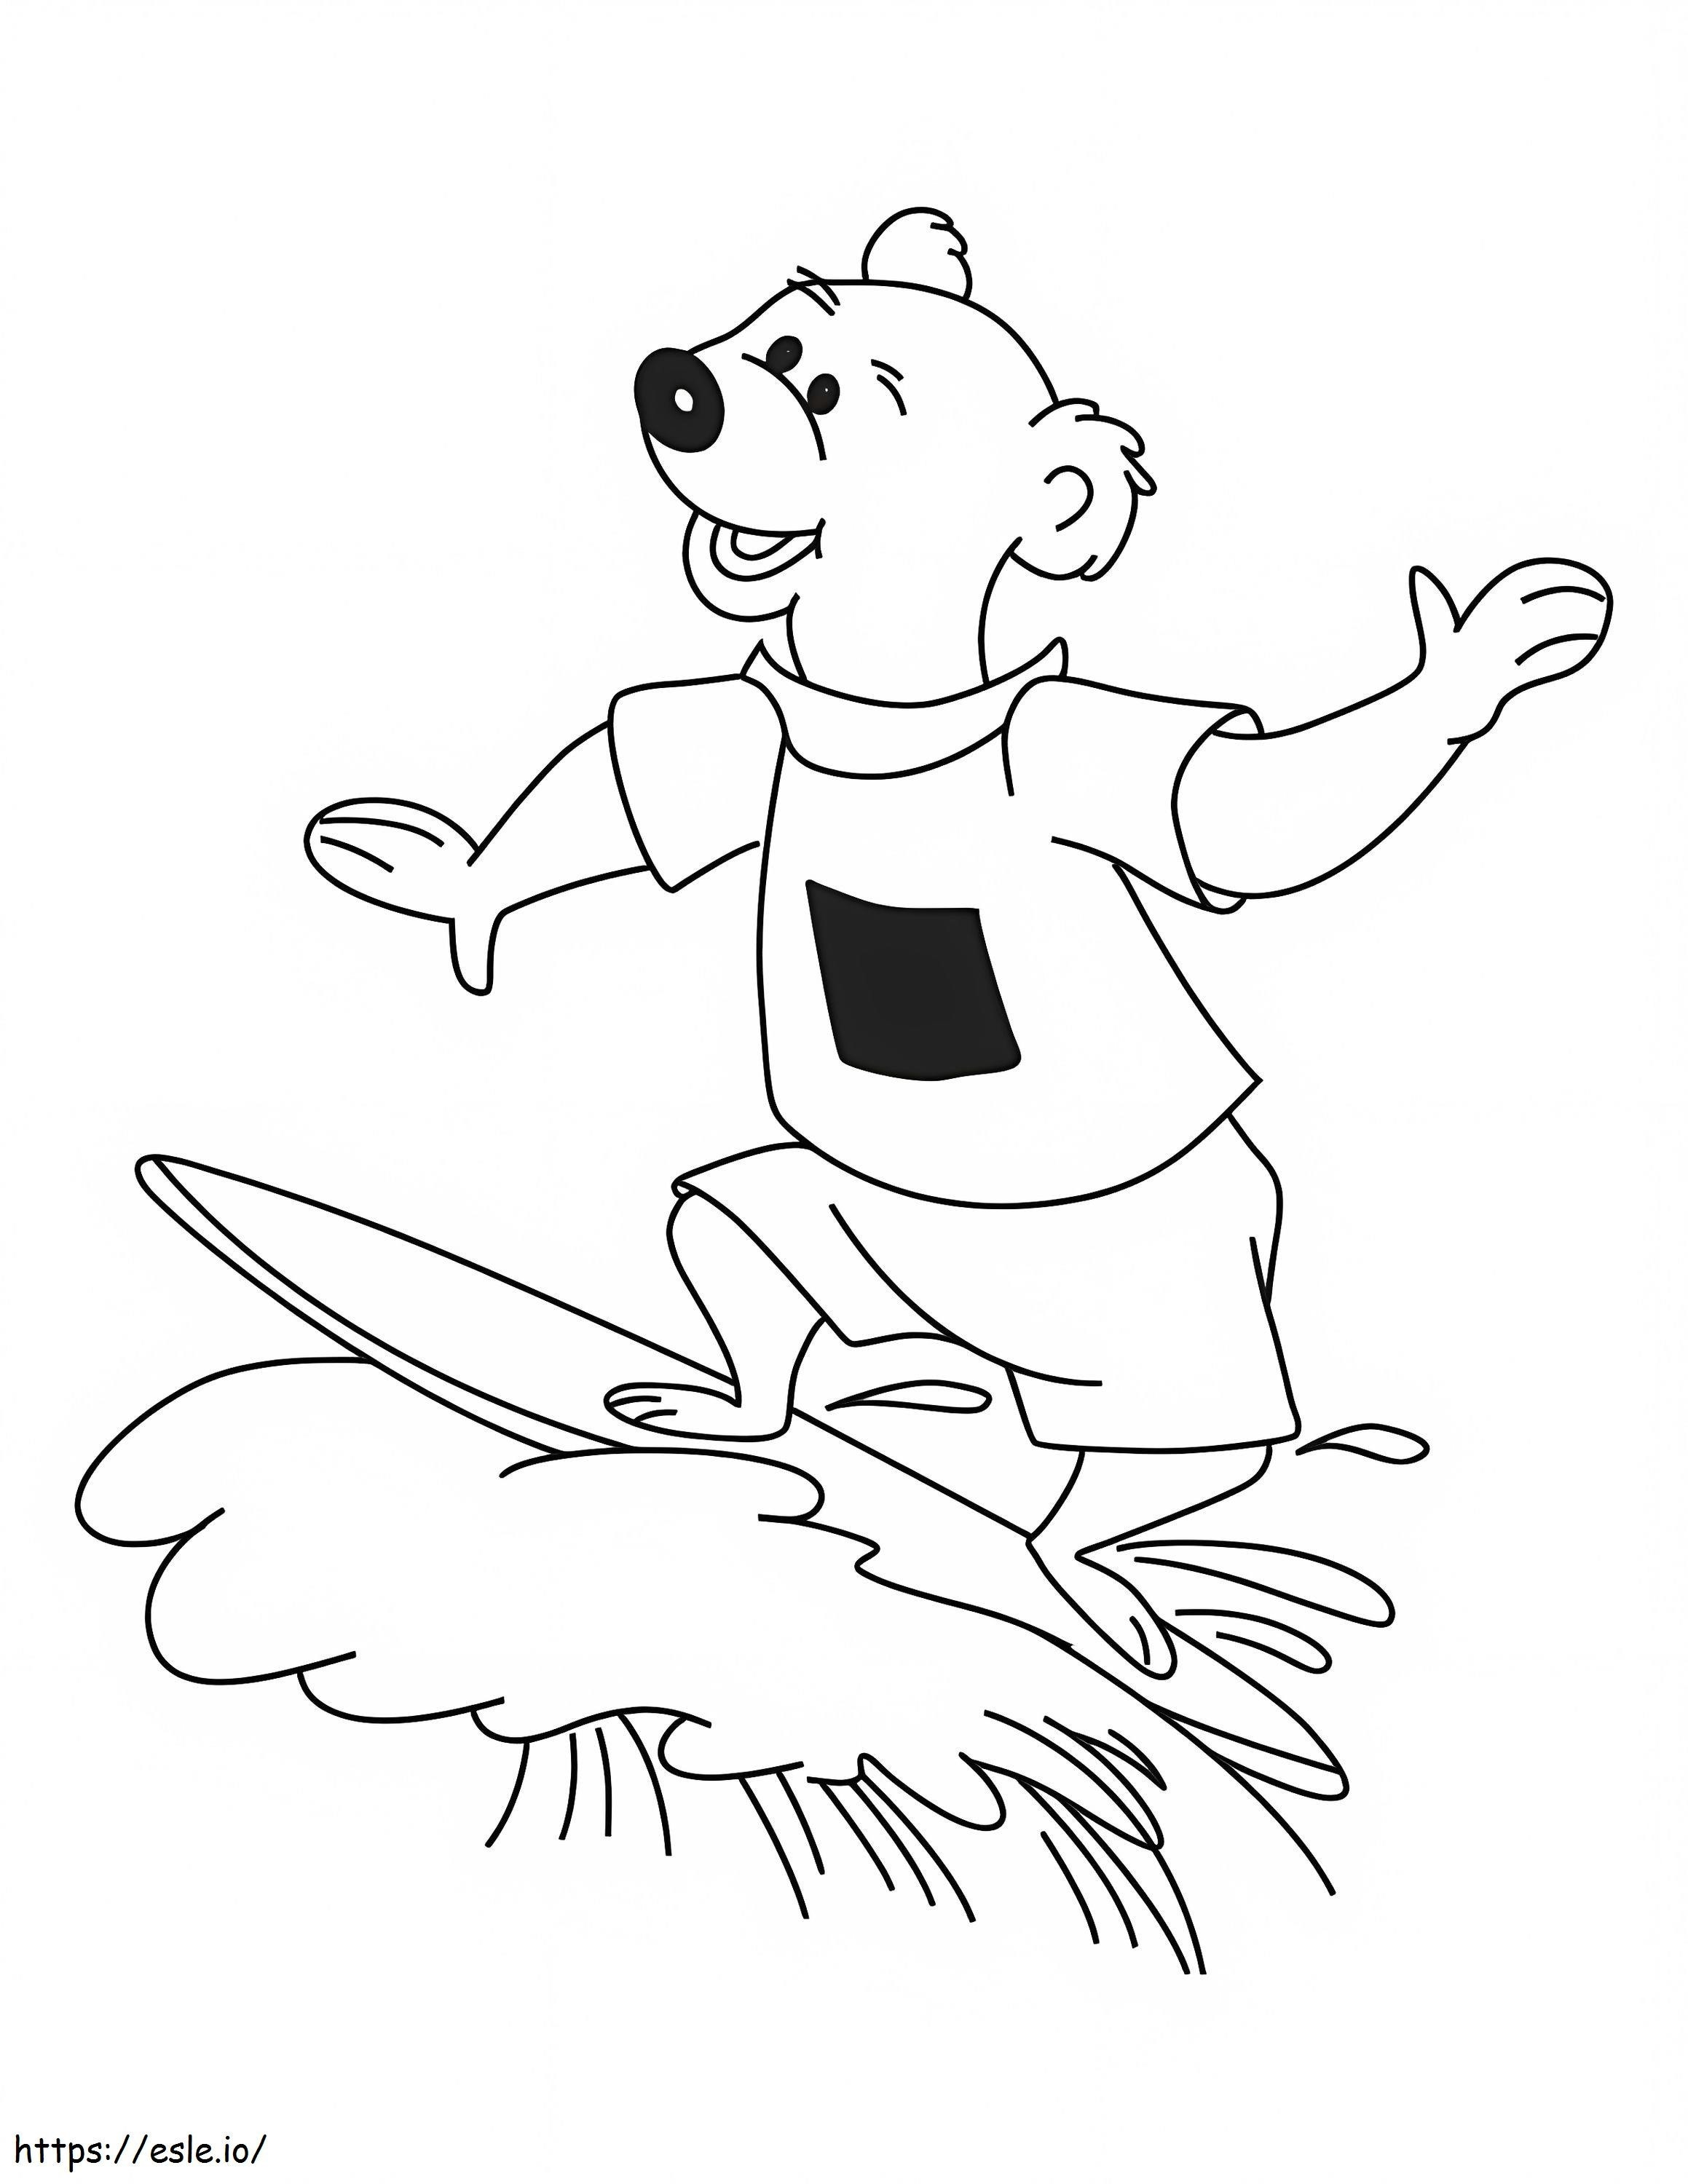 A Bear Surfing coloring page